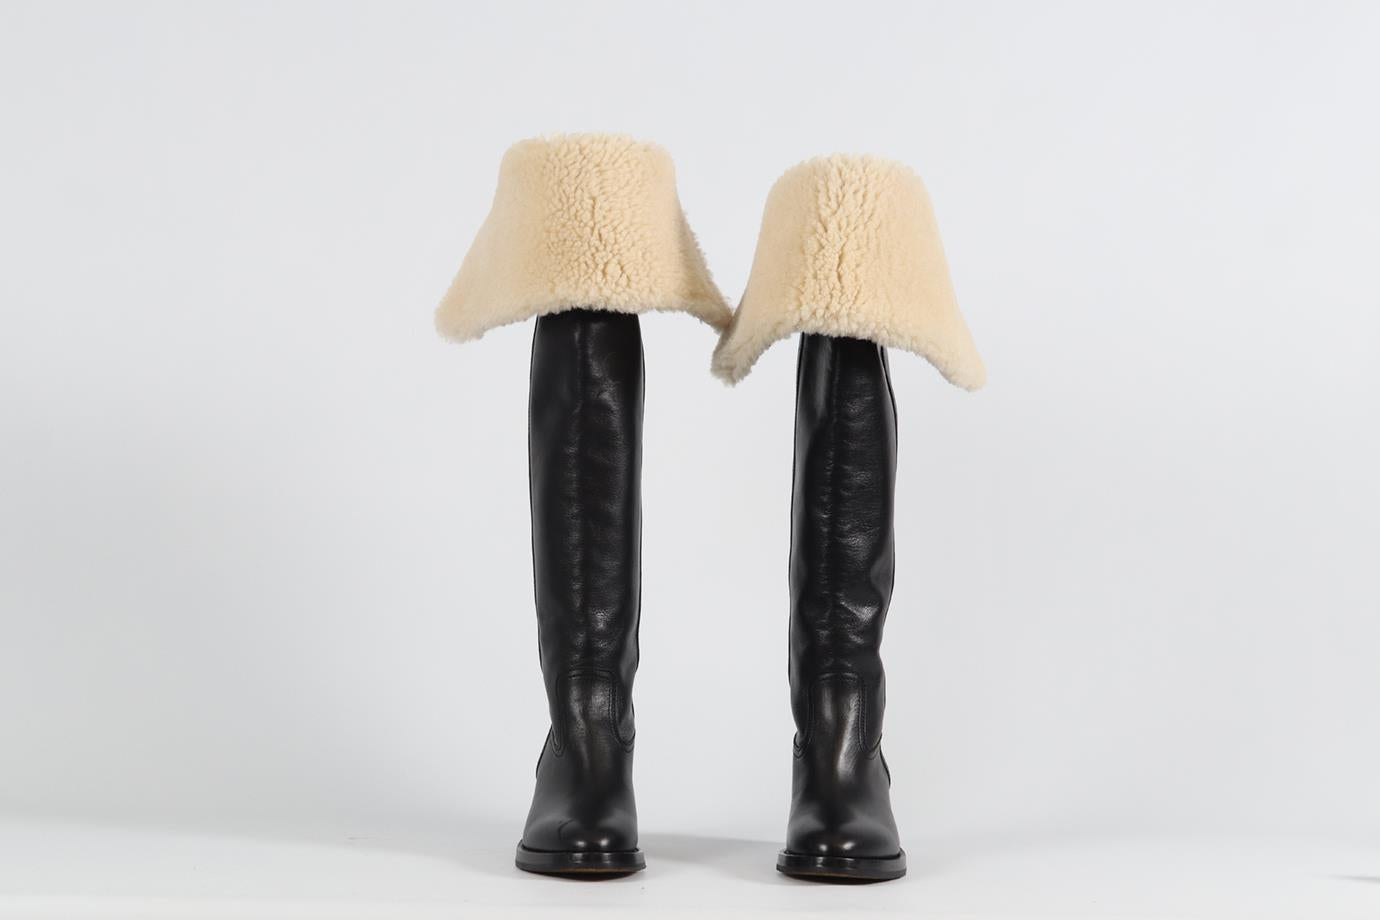 CELINE SHEARLING AND LEATHER OVER THE KNEE BOOTS EU 38.5 UK 5.5 US 8.5